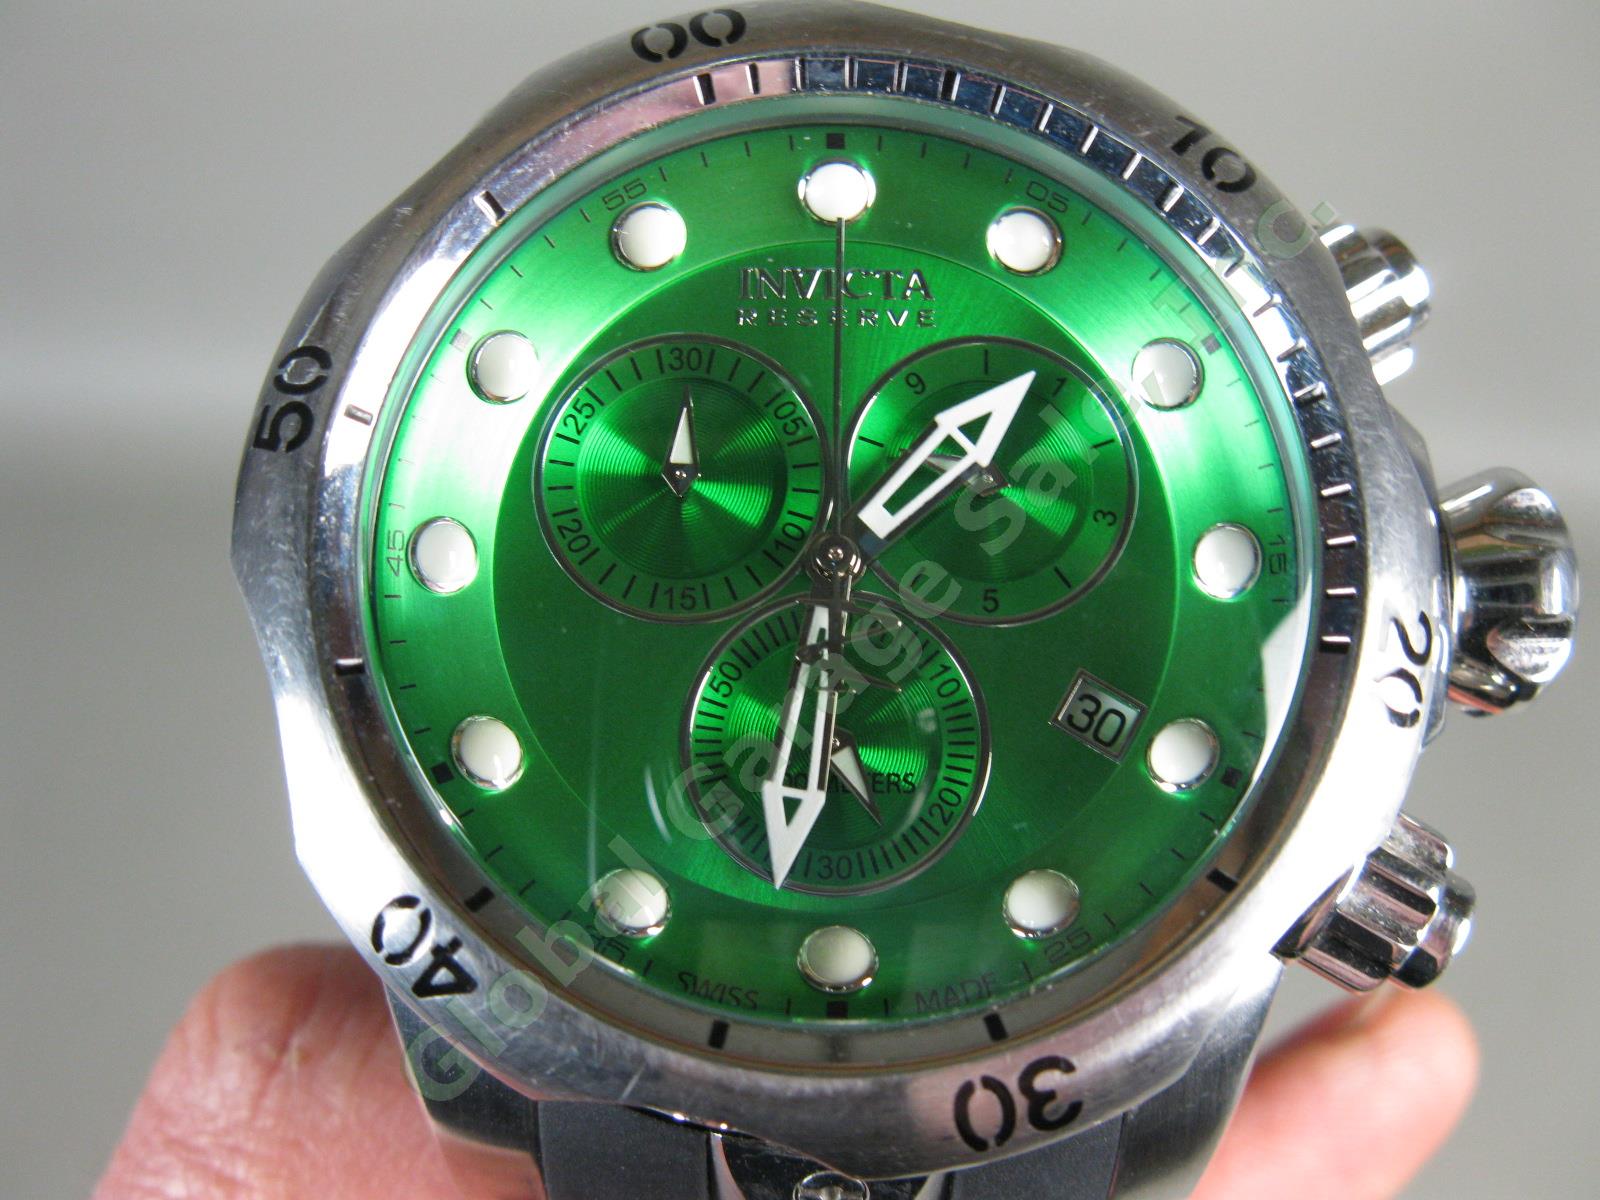 Invicta 6105 Venom Reserve Chronograph Watch Green Dial Works Great! New Battery 2